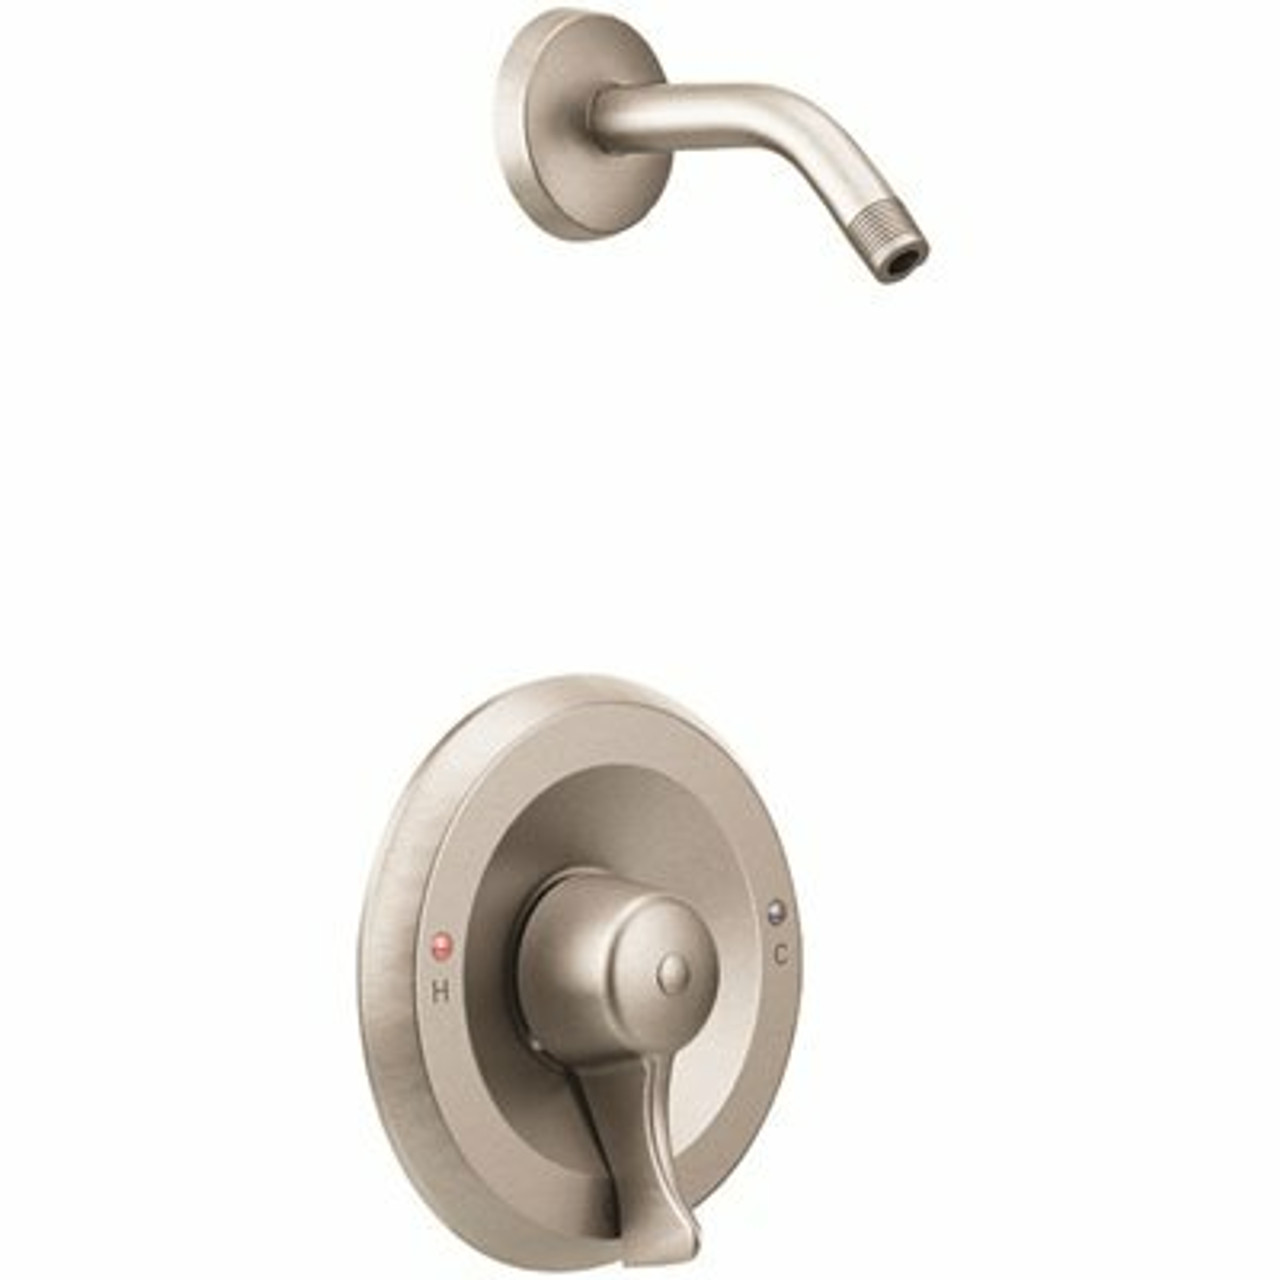 Moen Commercial Posi-Temp 1-Handle Shower Trim Without Valve Or Showerhead, Lever Handle, Brushed Nickel